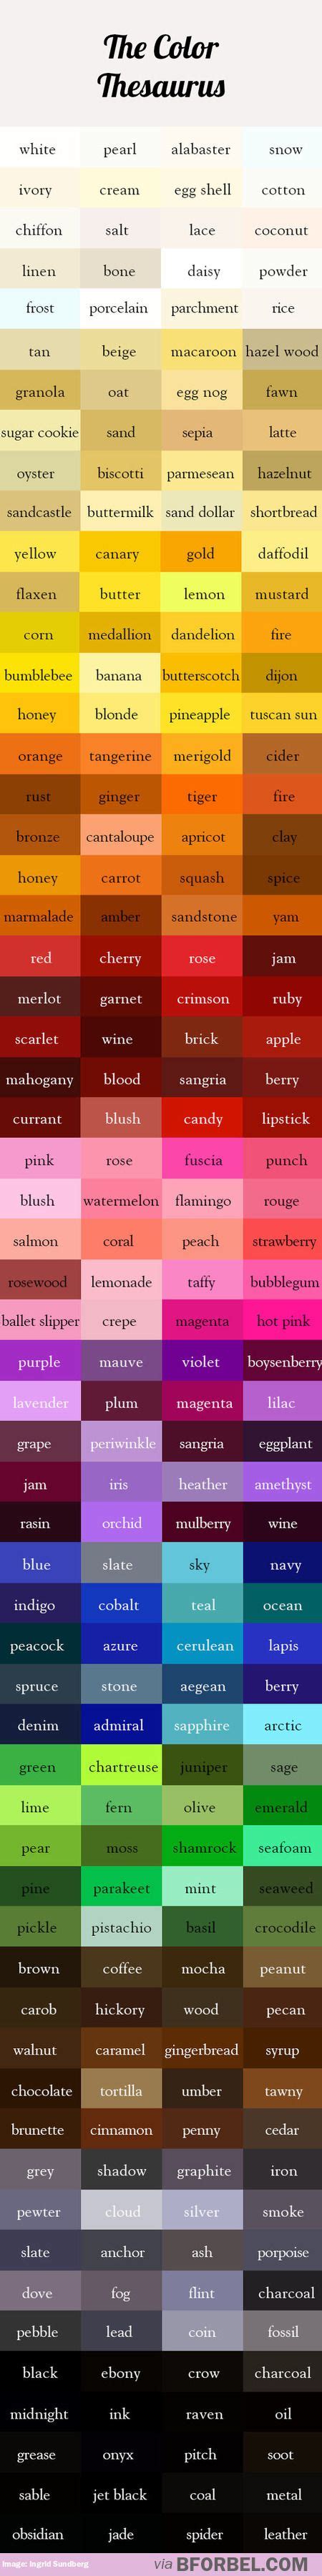 Psychology Introducing The Color Thesaurus To Help You Describe The